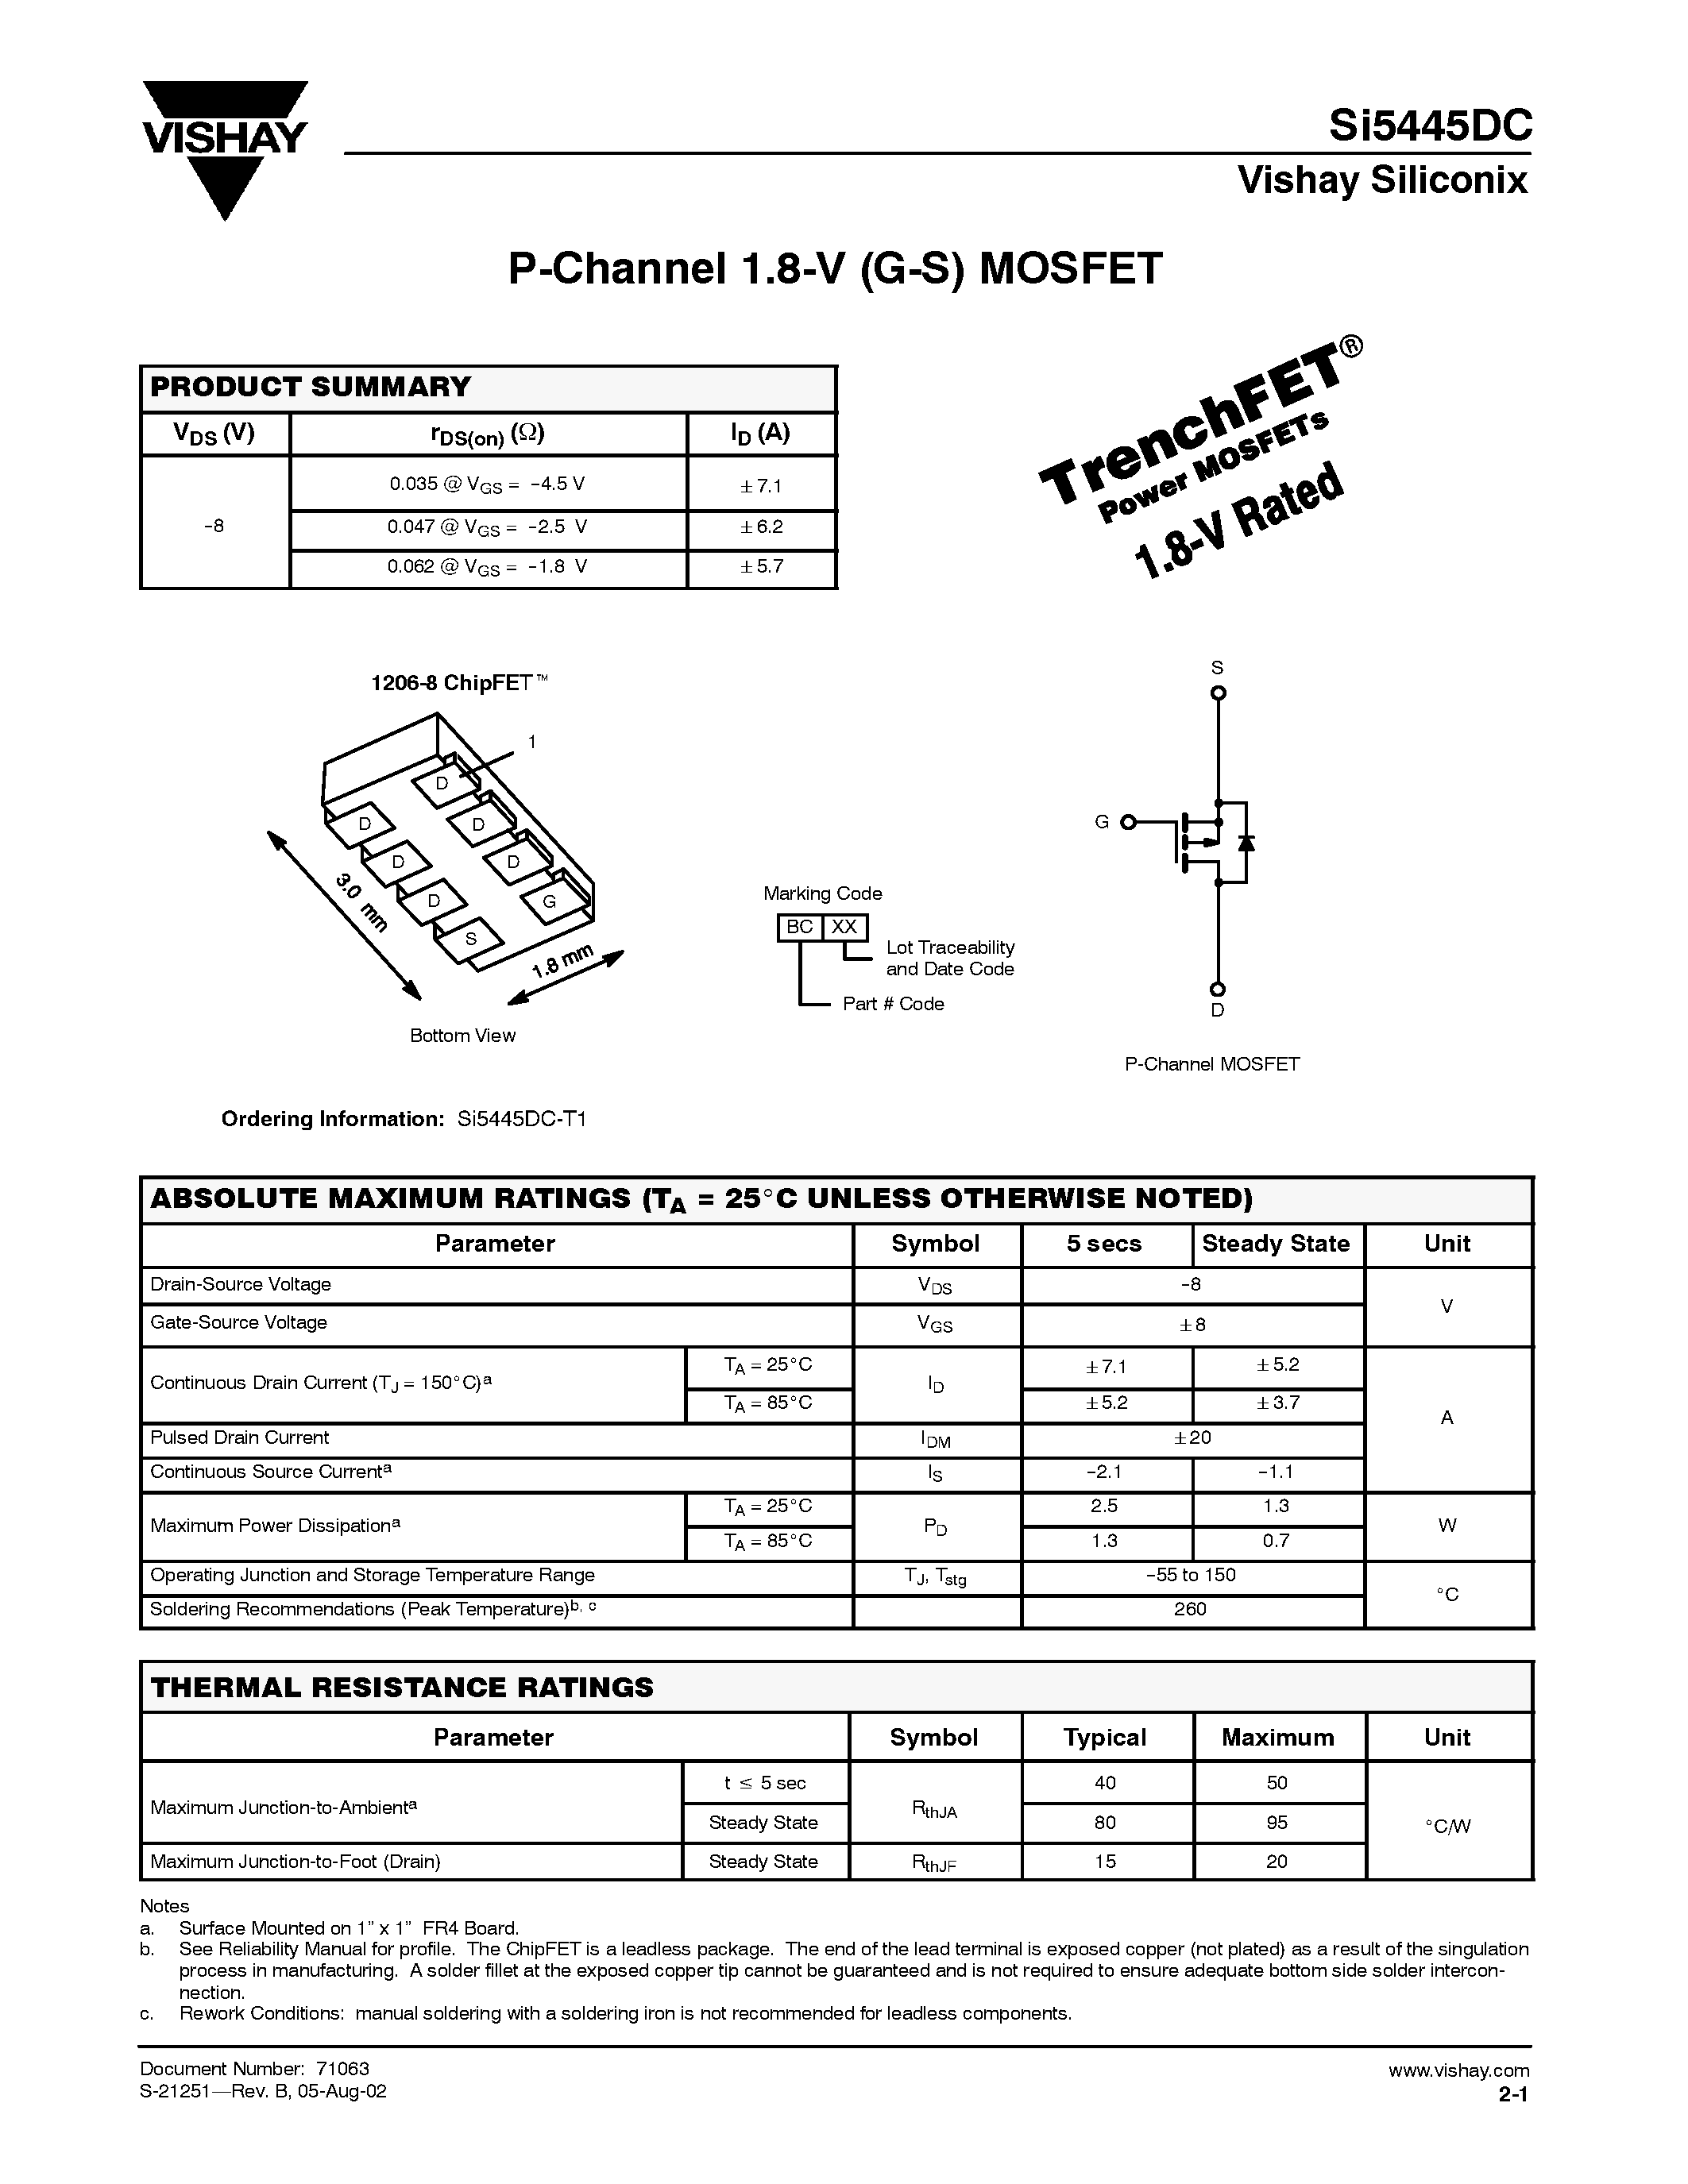 Datasheet SI5445DC-T1 - P-Channel 1.8-V (G-S) MOSFET page 1